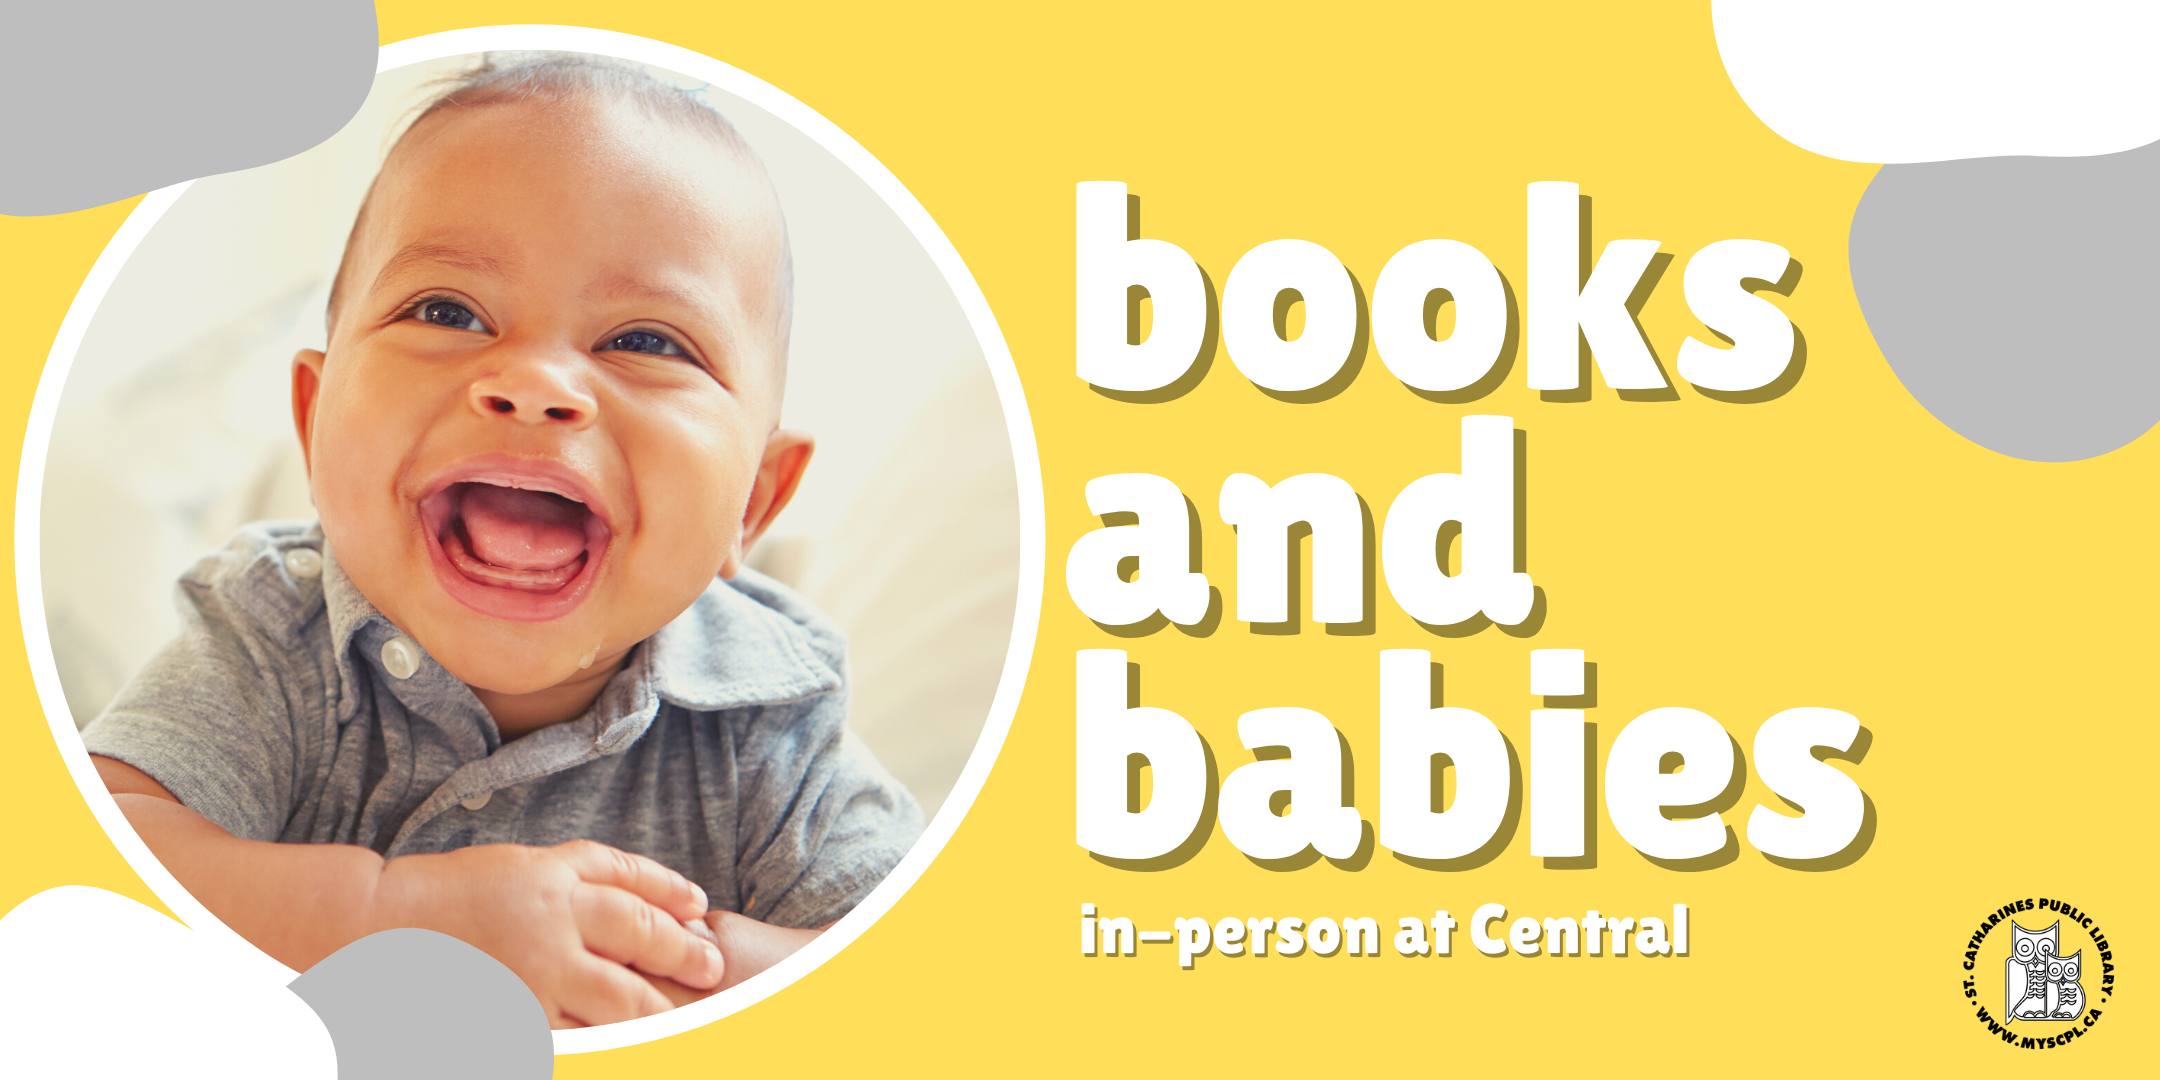 yellow banner with baby image "Books & Babies at Central"